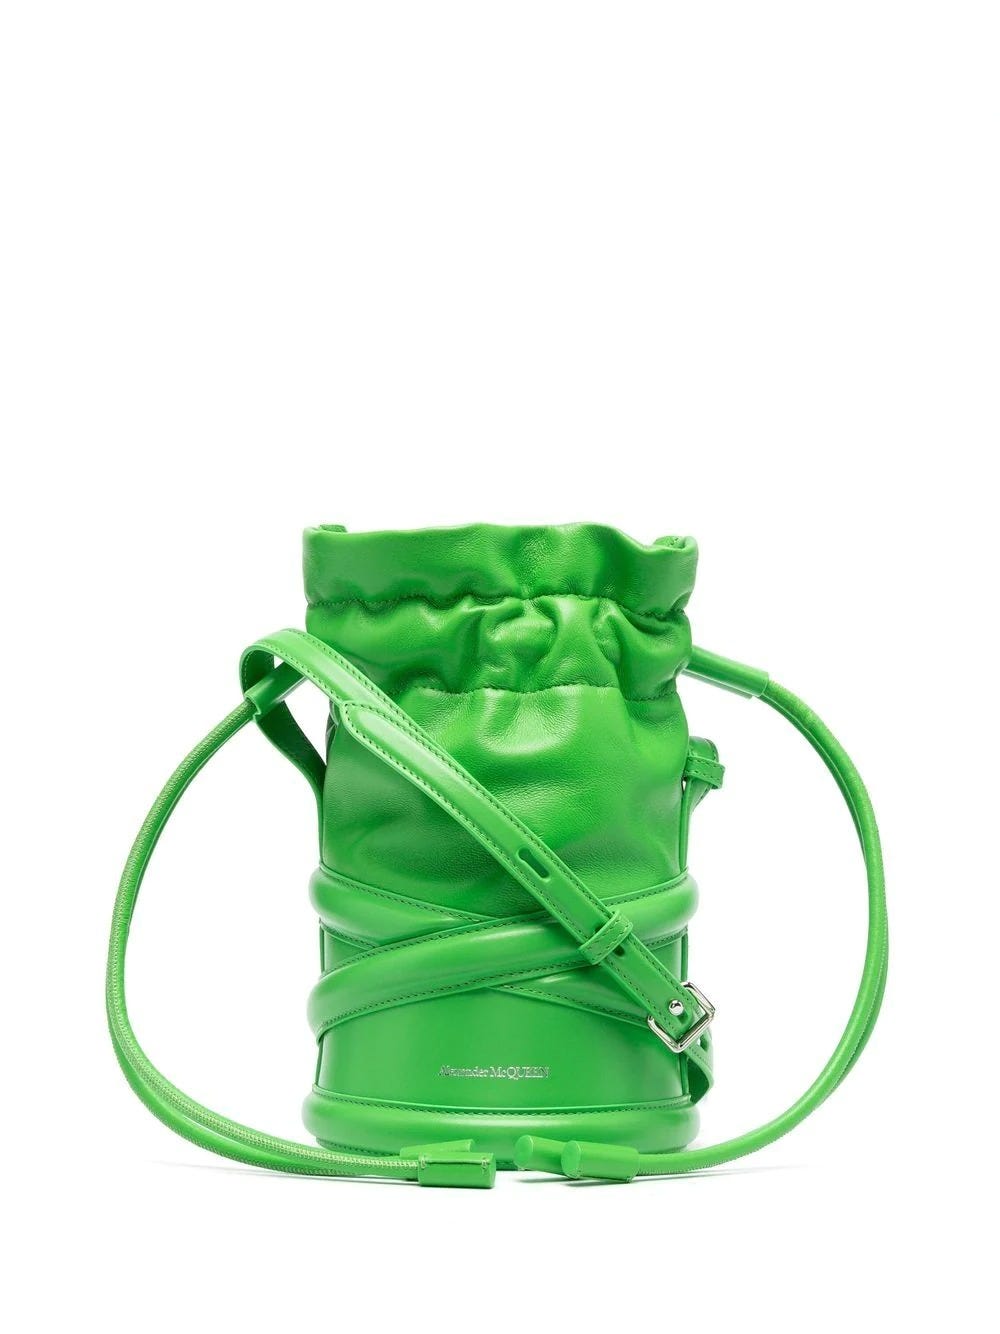 Alexander Mcqueen Green Shoulder Bag The Curve With Drawstring